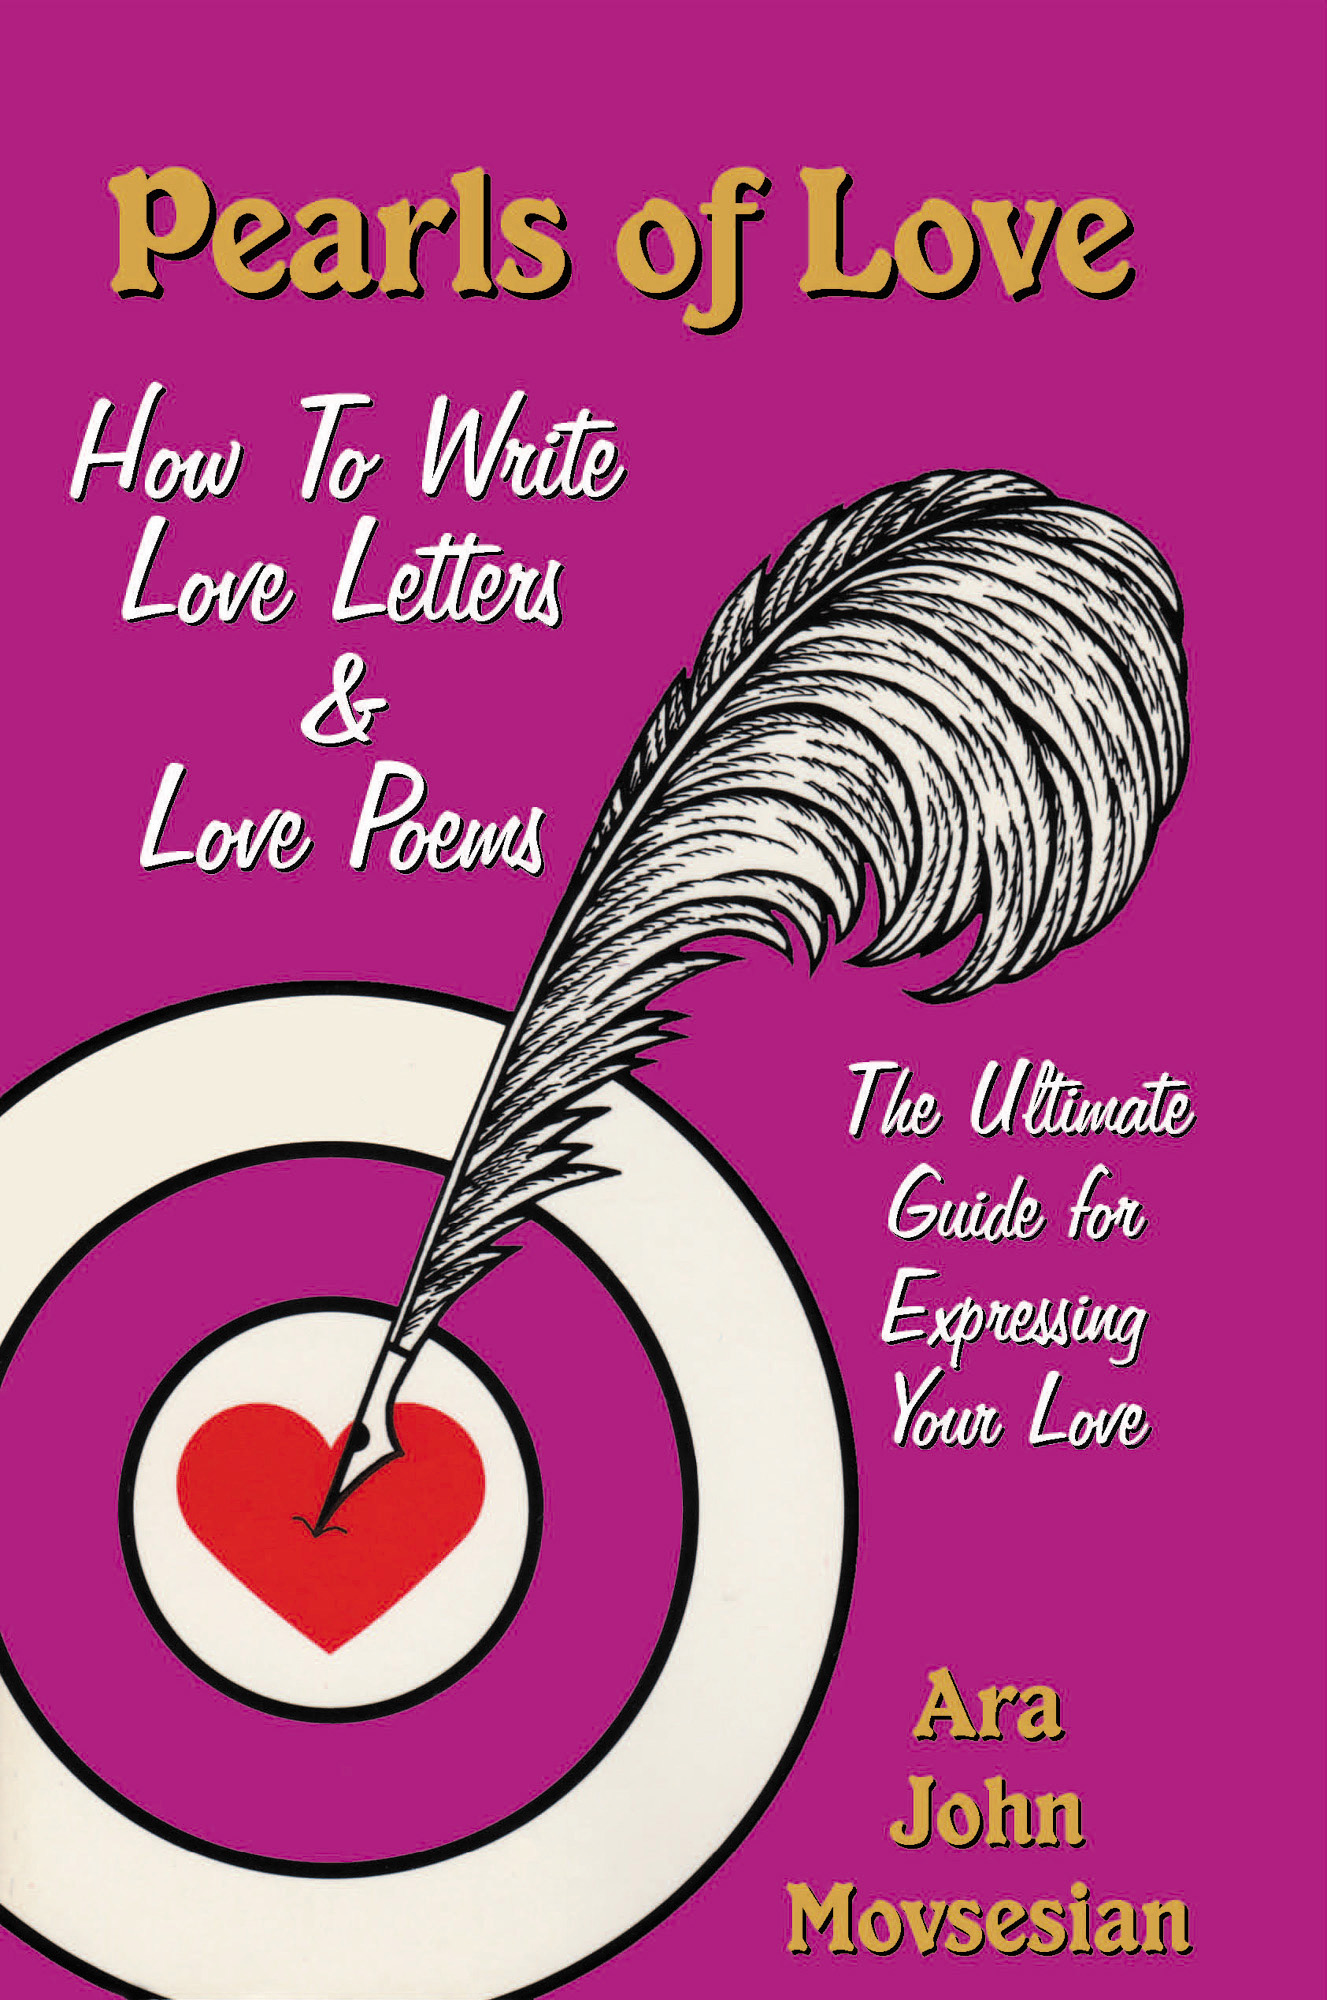 Pearls of Love: How to Write Love Letters & Love Poems